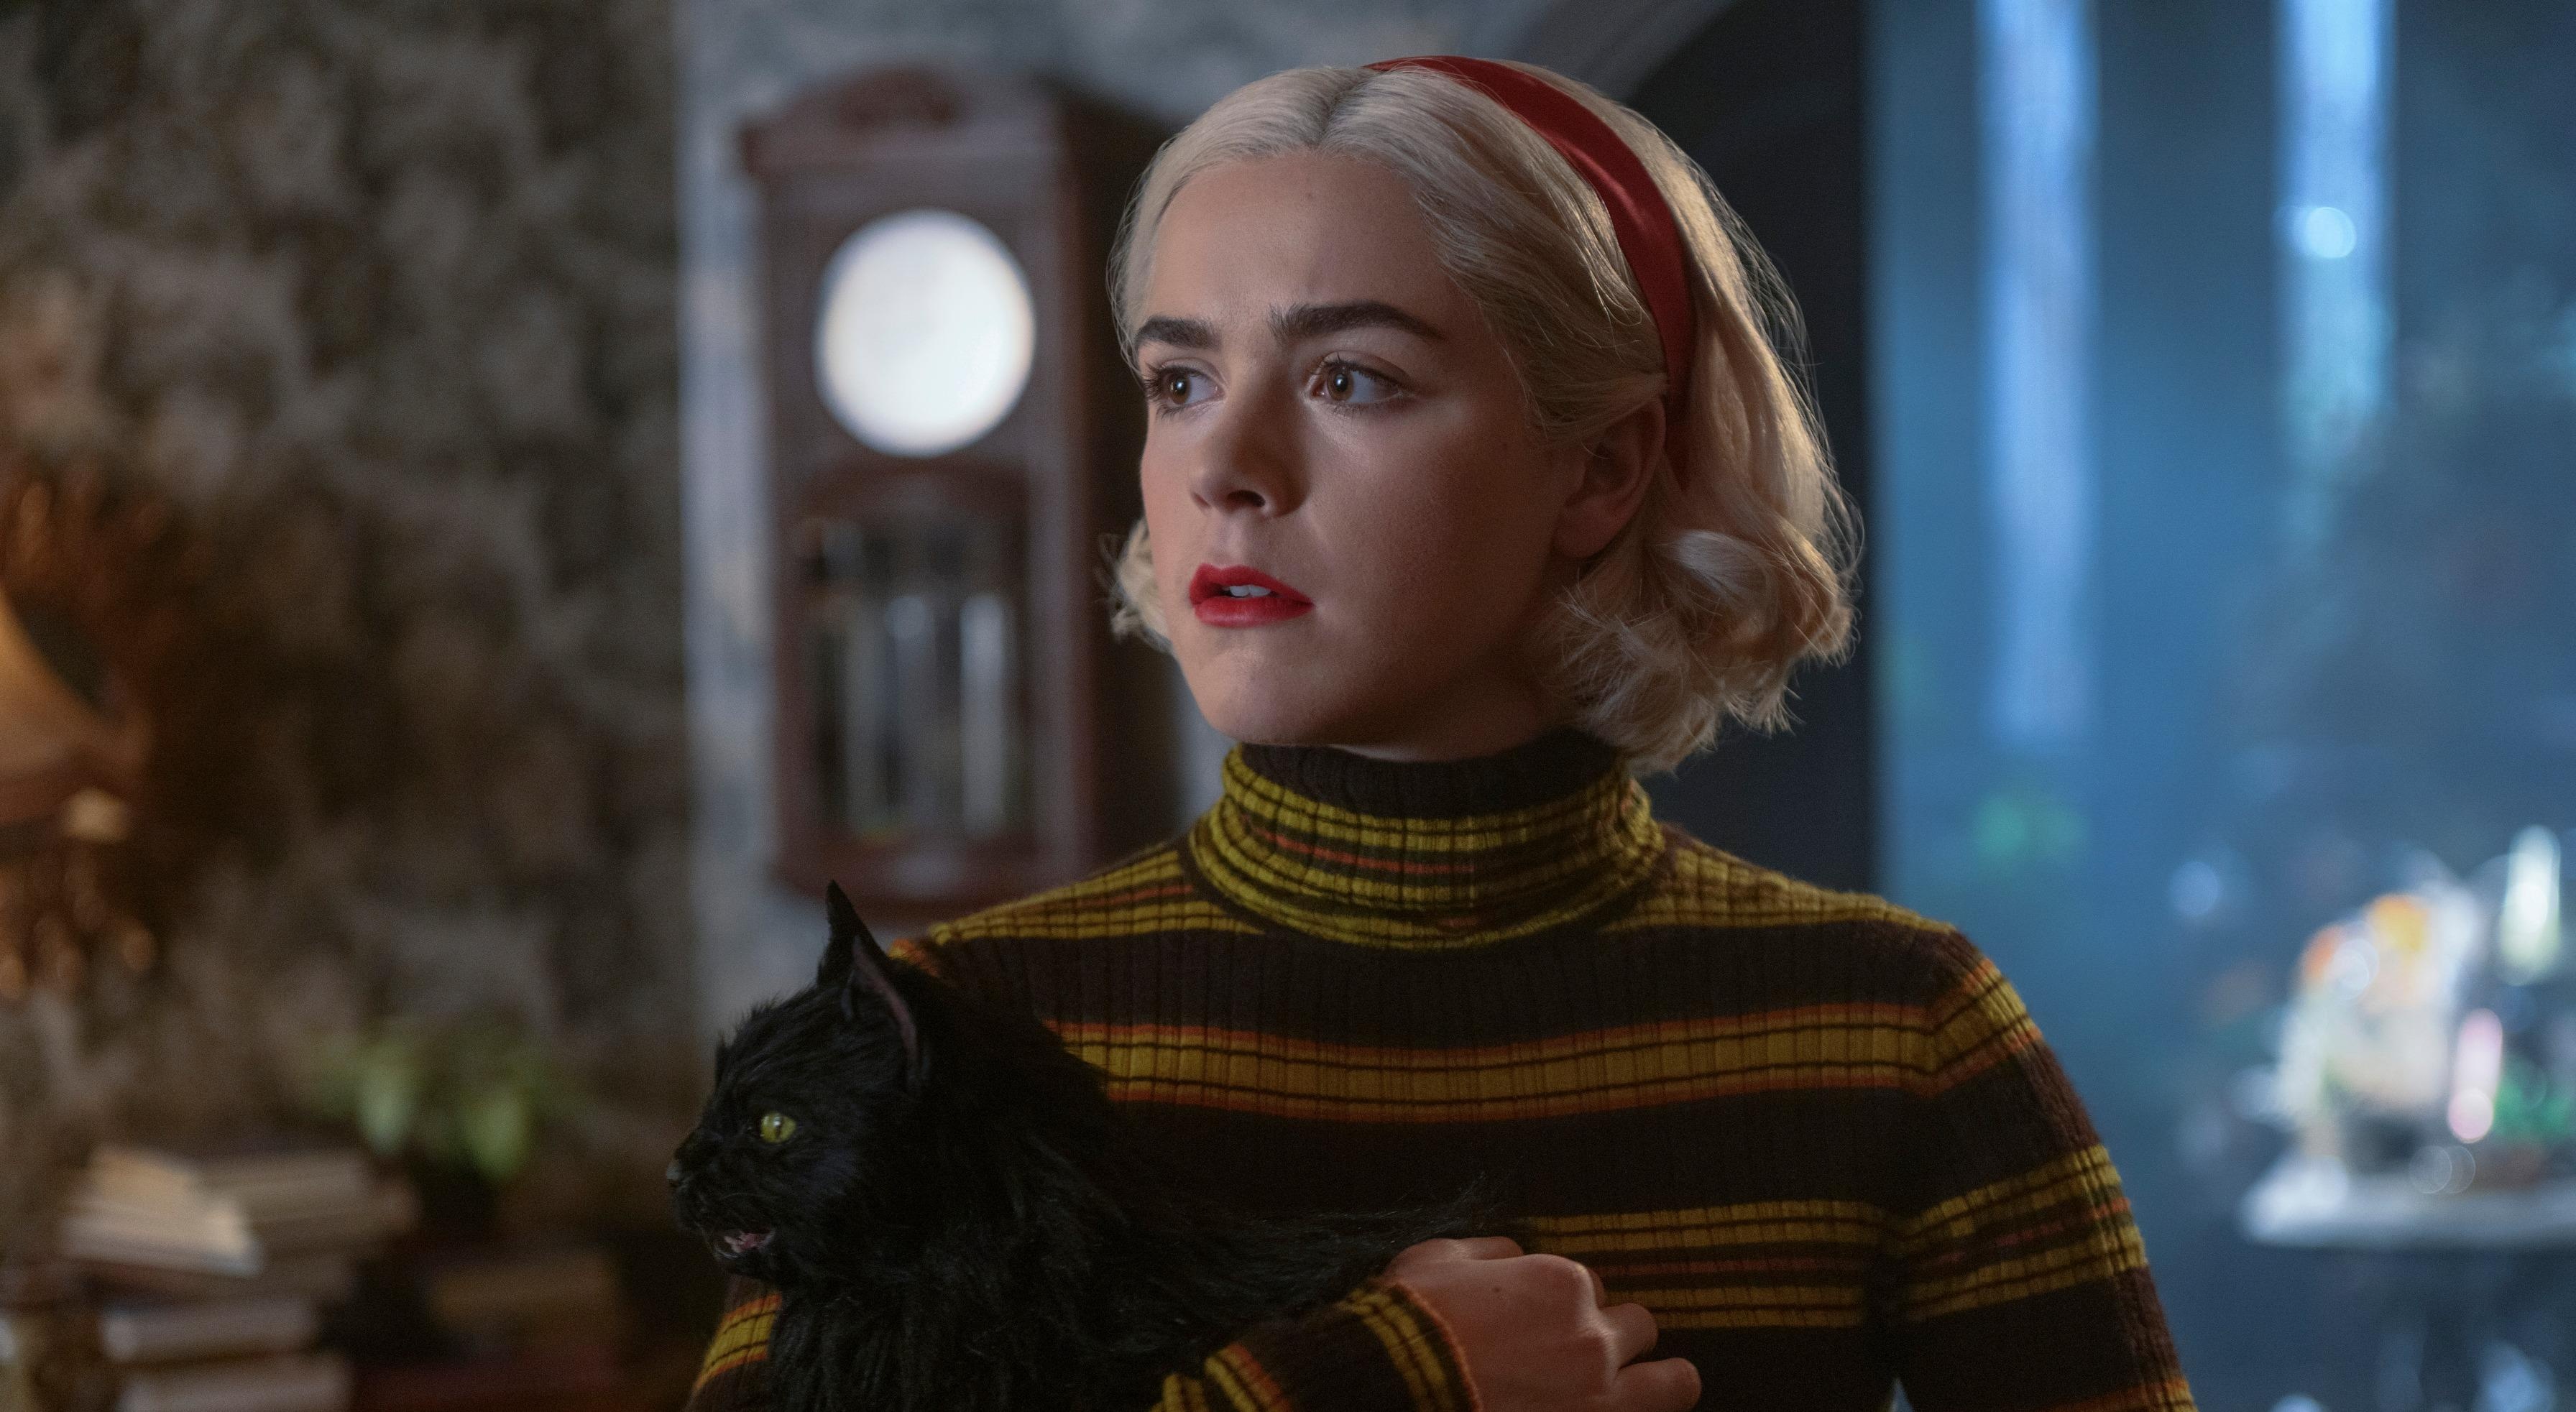 Chilling Adventures of Sabrina, TV Shows, Teen witch drama, Supernatural elements, 3590x1970 HD Desktop